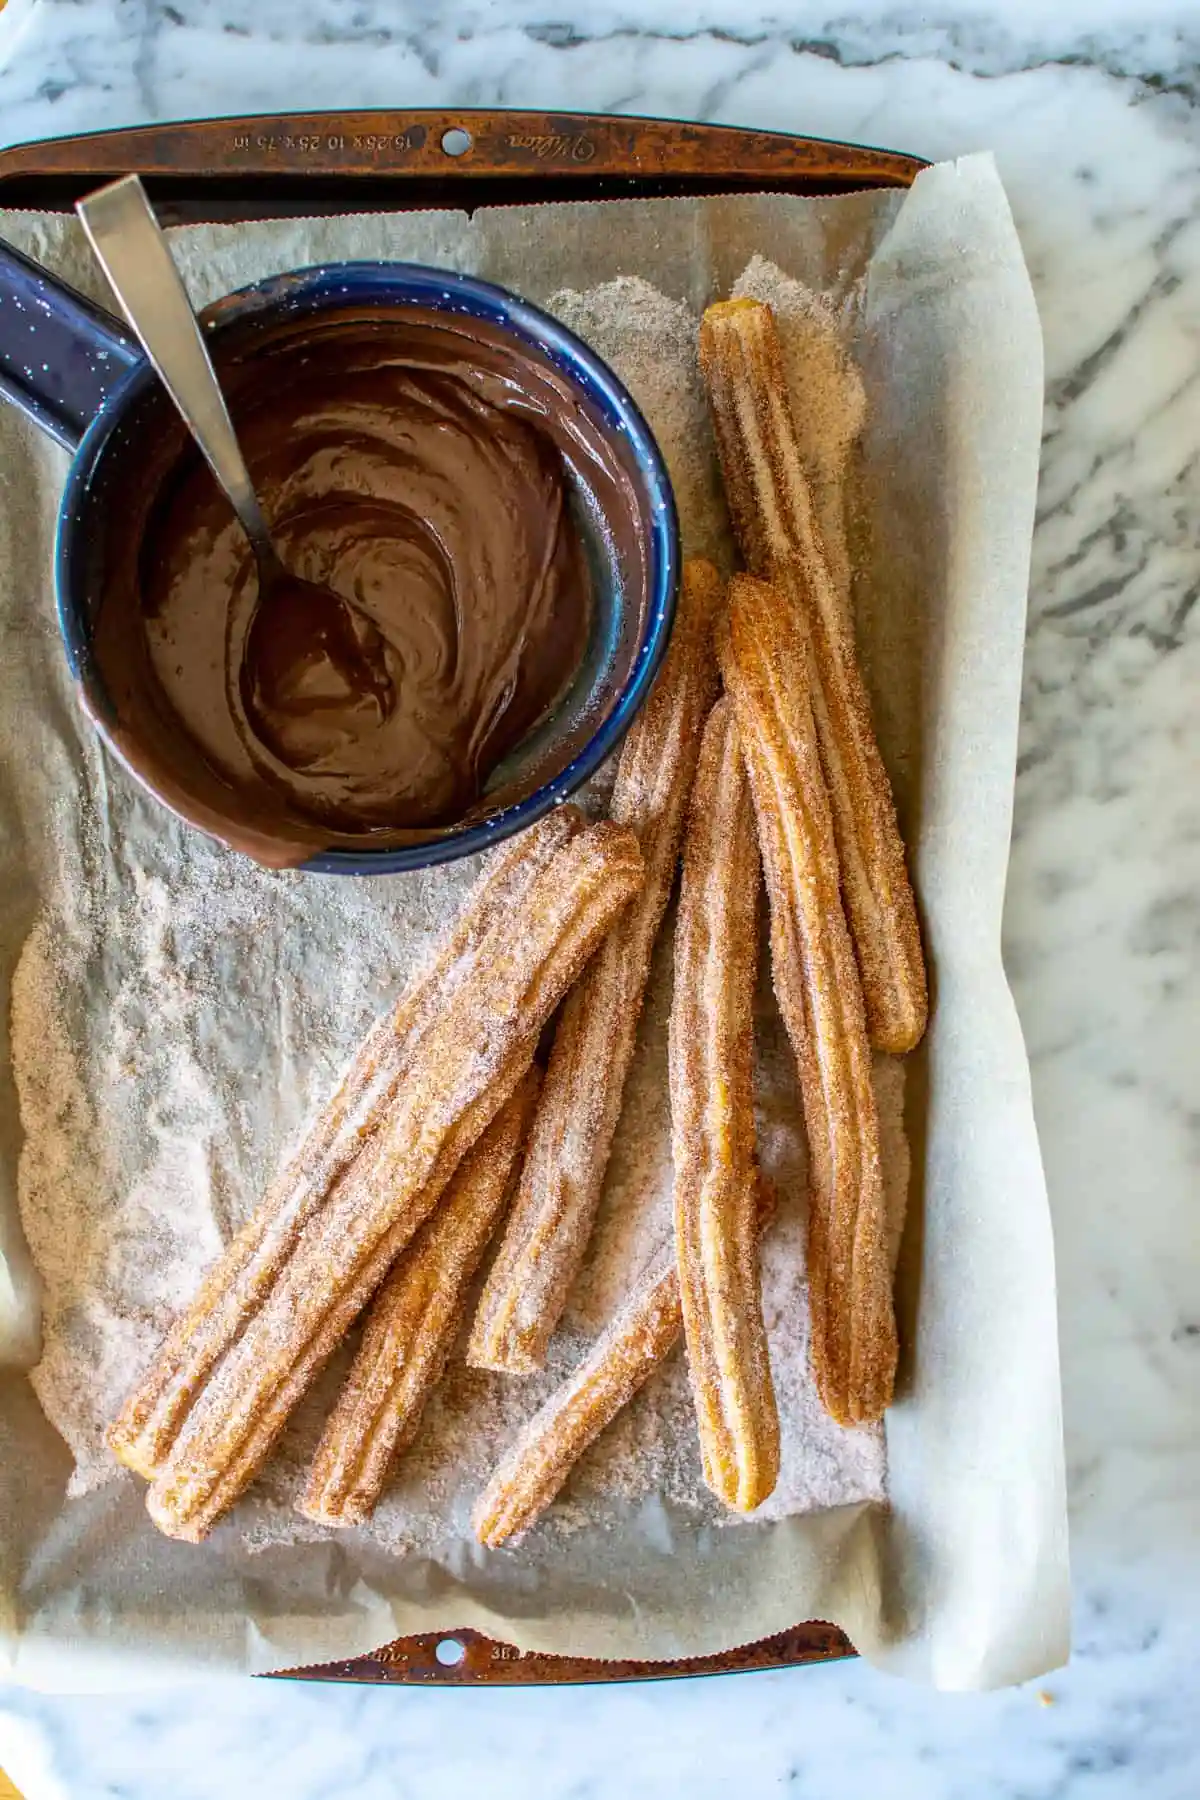 Authentic Churros Recipe with Chocolate Sauce
